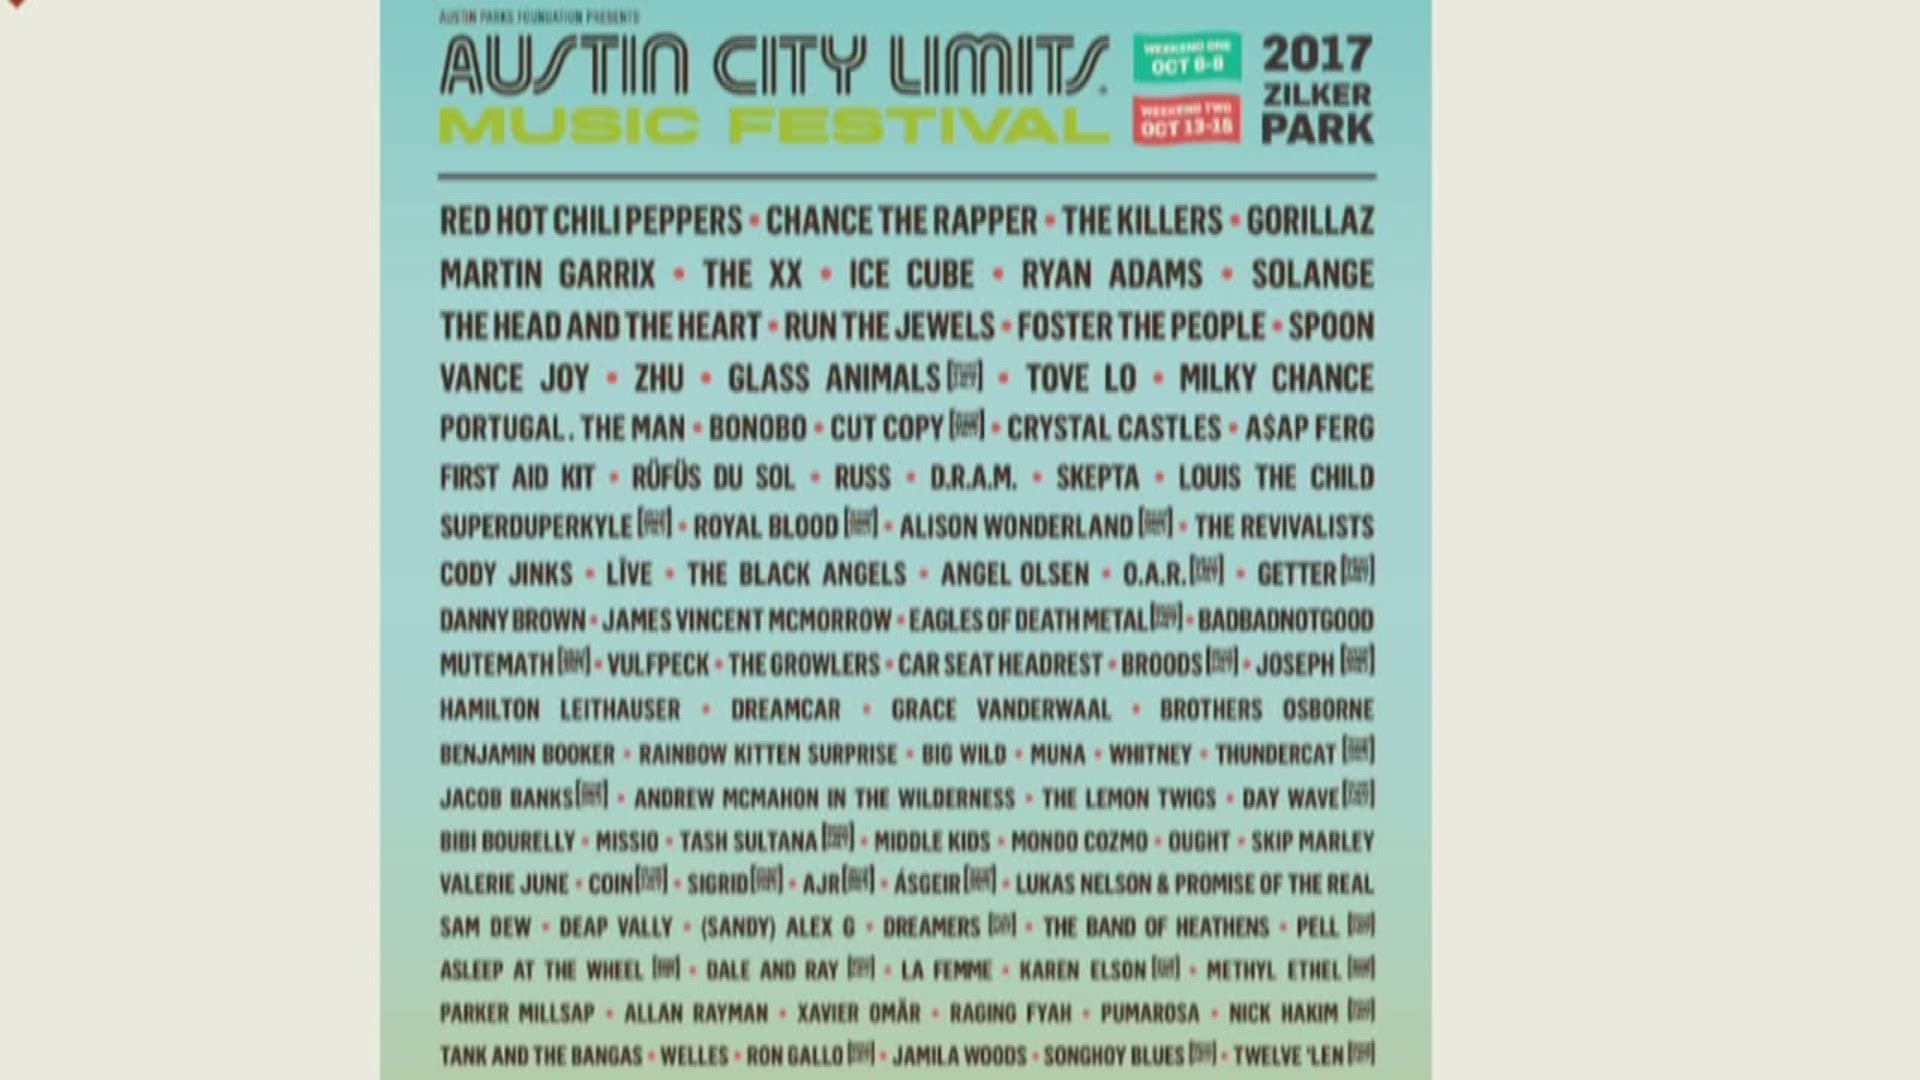 Red Hot Chili Peppers, Chance the Rapper, The Killers and Gorillaz are among the acts for the 2017 Austin City Limits Music Festival.